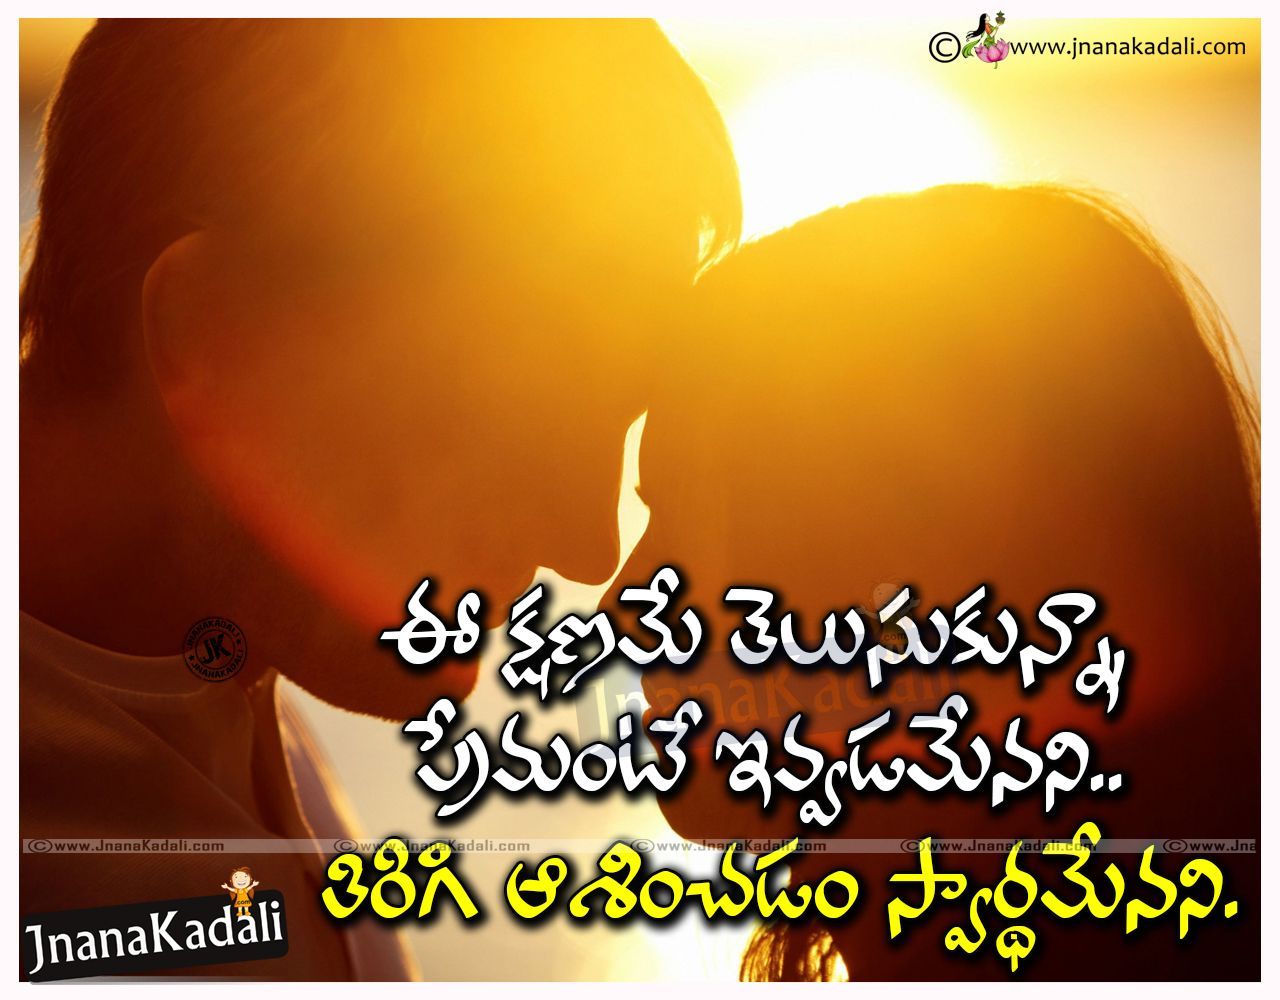 Romantic Heart Touching Love Quotes In Telugu With - Love Quotes Images Telugu , HD Wallpaper & Backgrounds